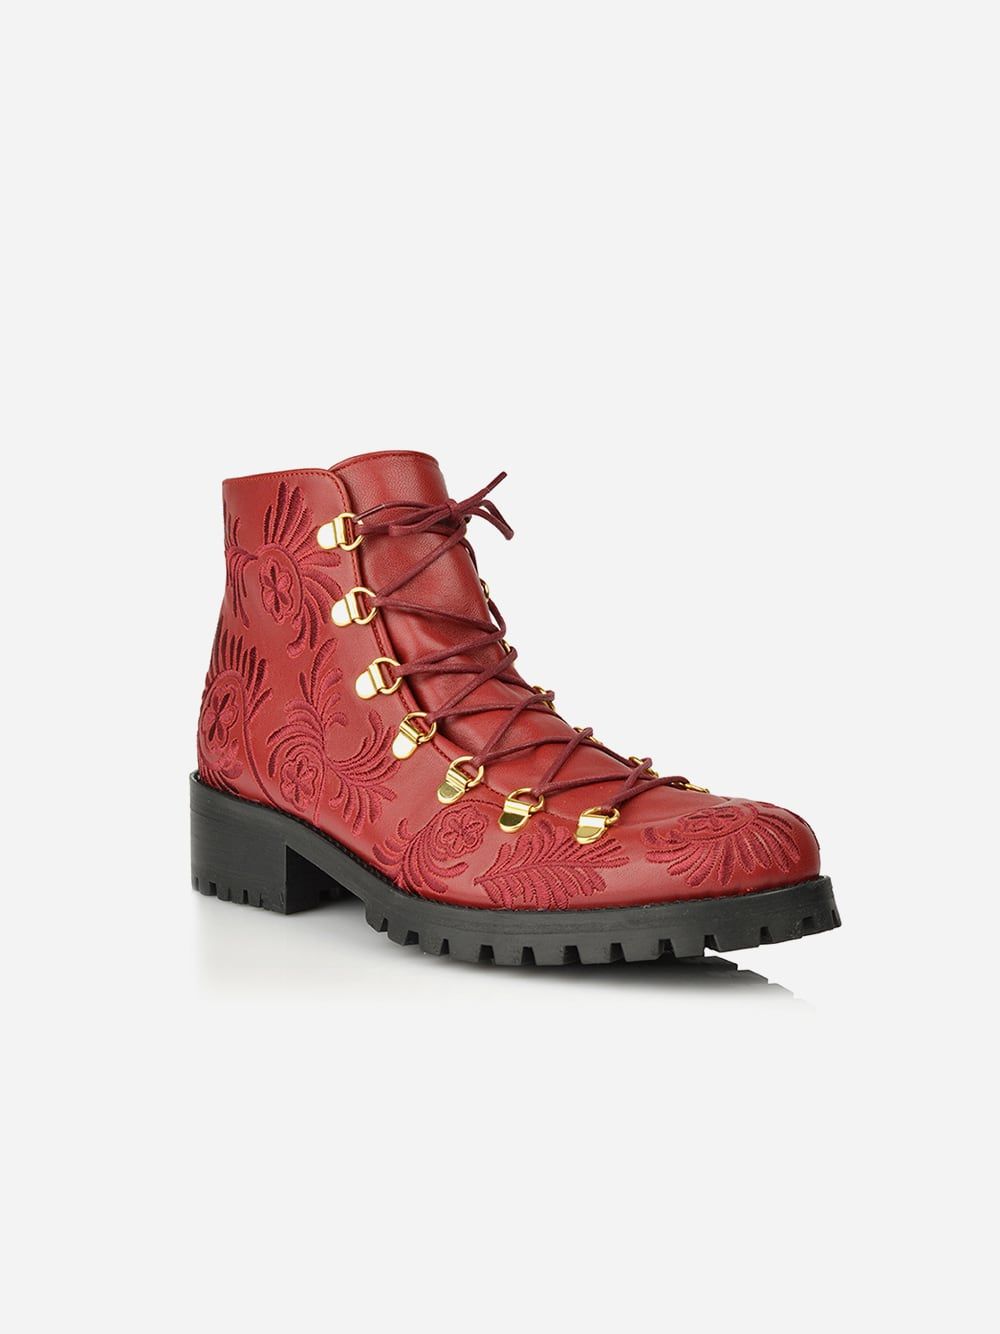 Cherry Embroidery Boots | JJ Heitor